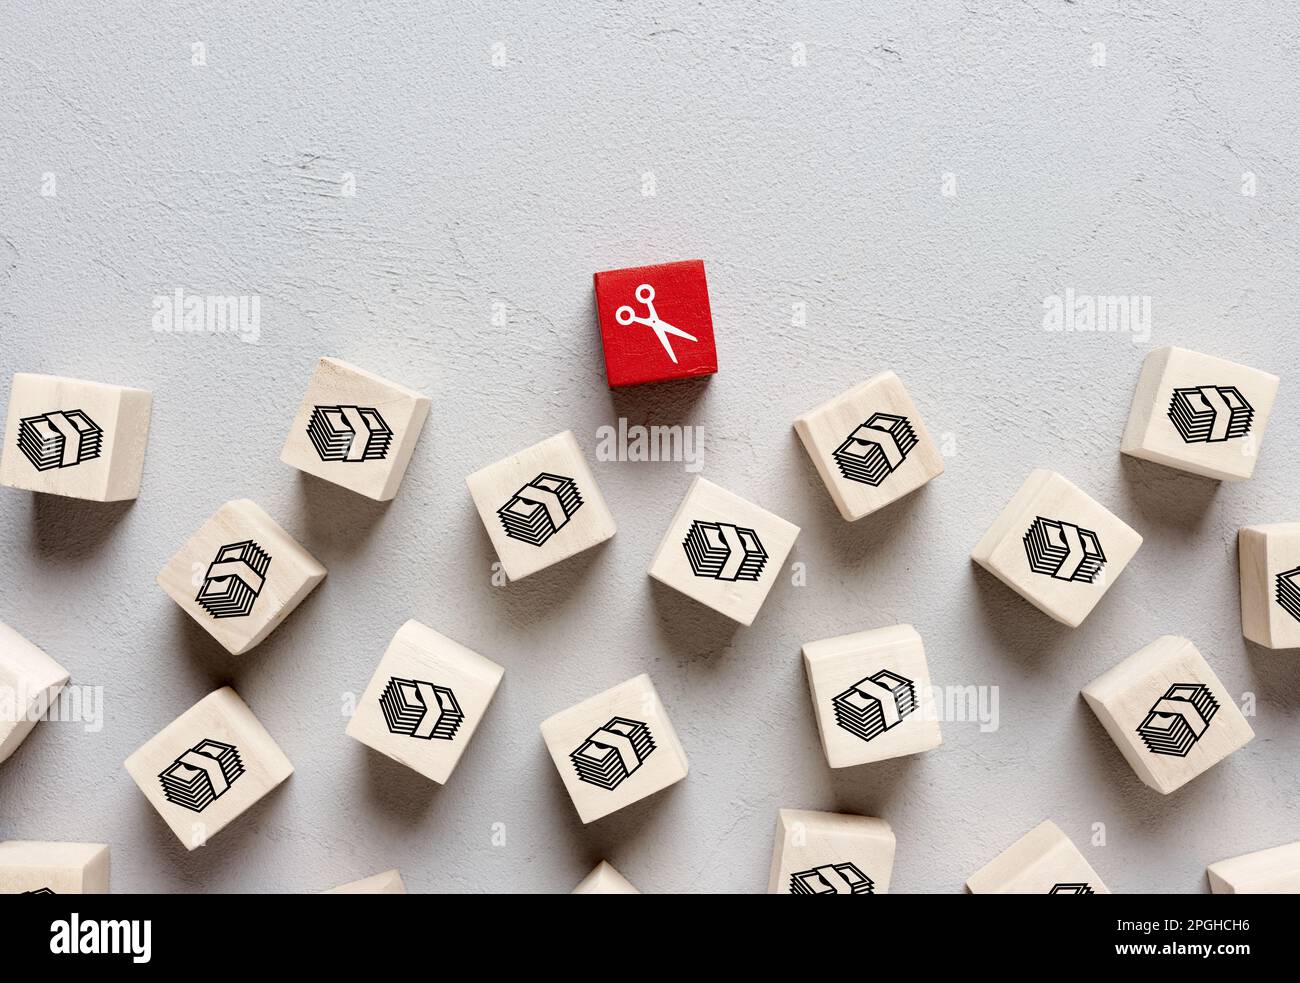 Budget cut concept. Income reduction, economic crisis, business loan or debt. Scissors and money icons on wooden cubes. Stock Photo